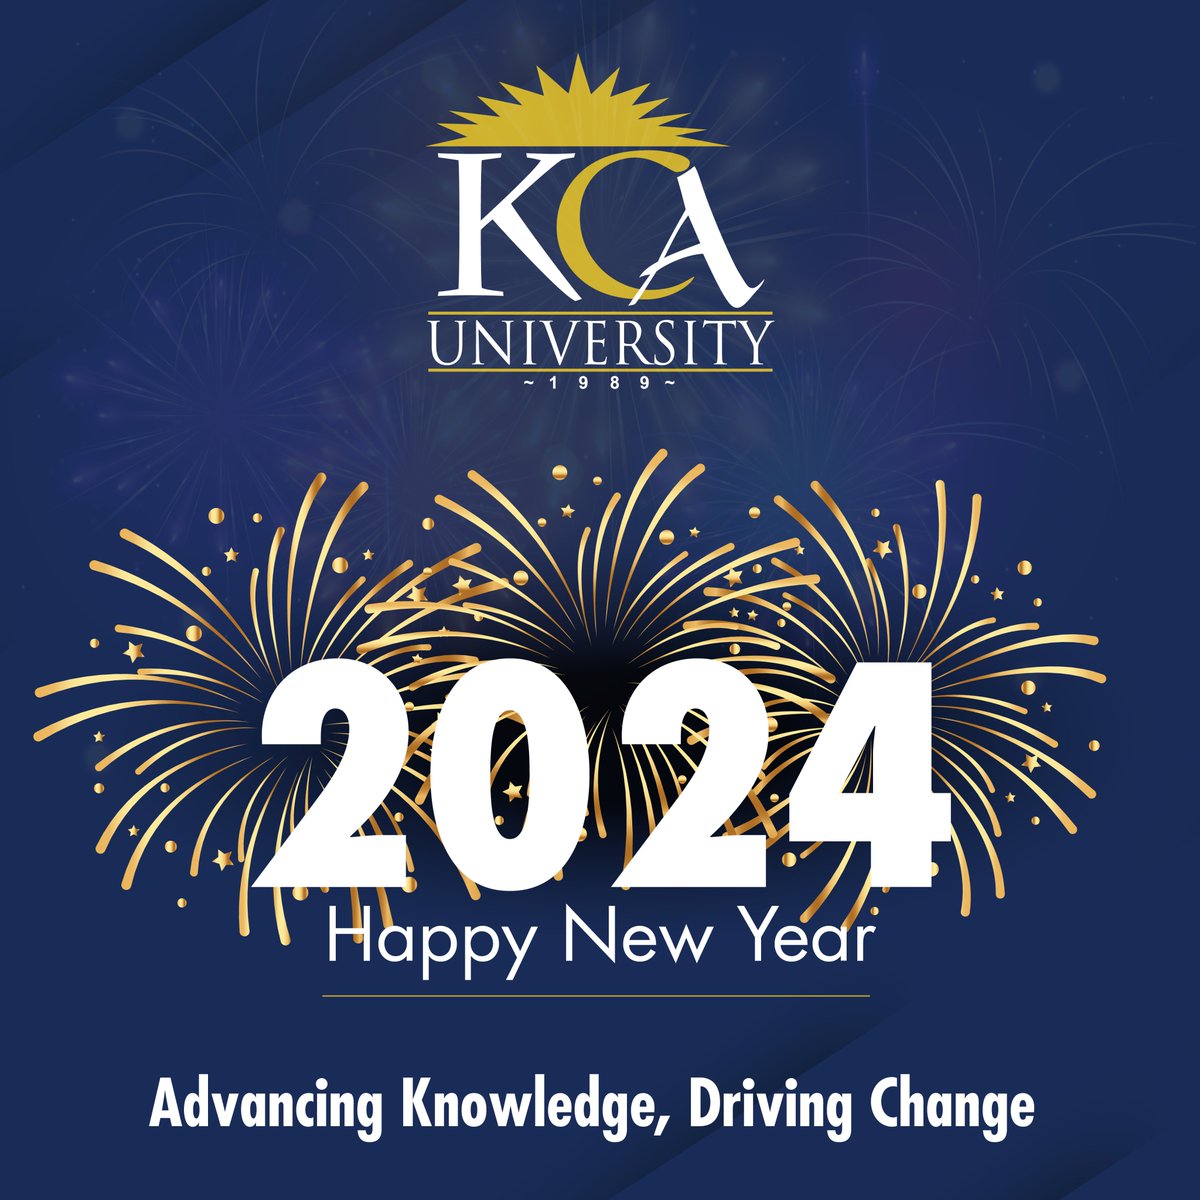 Here's to 366 Days of Advancing Knowledge, Driving Change! May each day bring you closer to leveling up to the best version of yourself. #KcauLevelUp #HappyNewYear2024